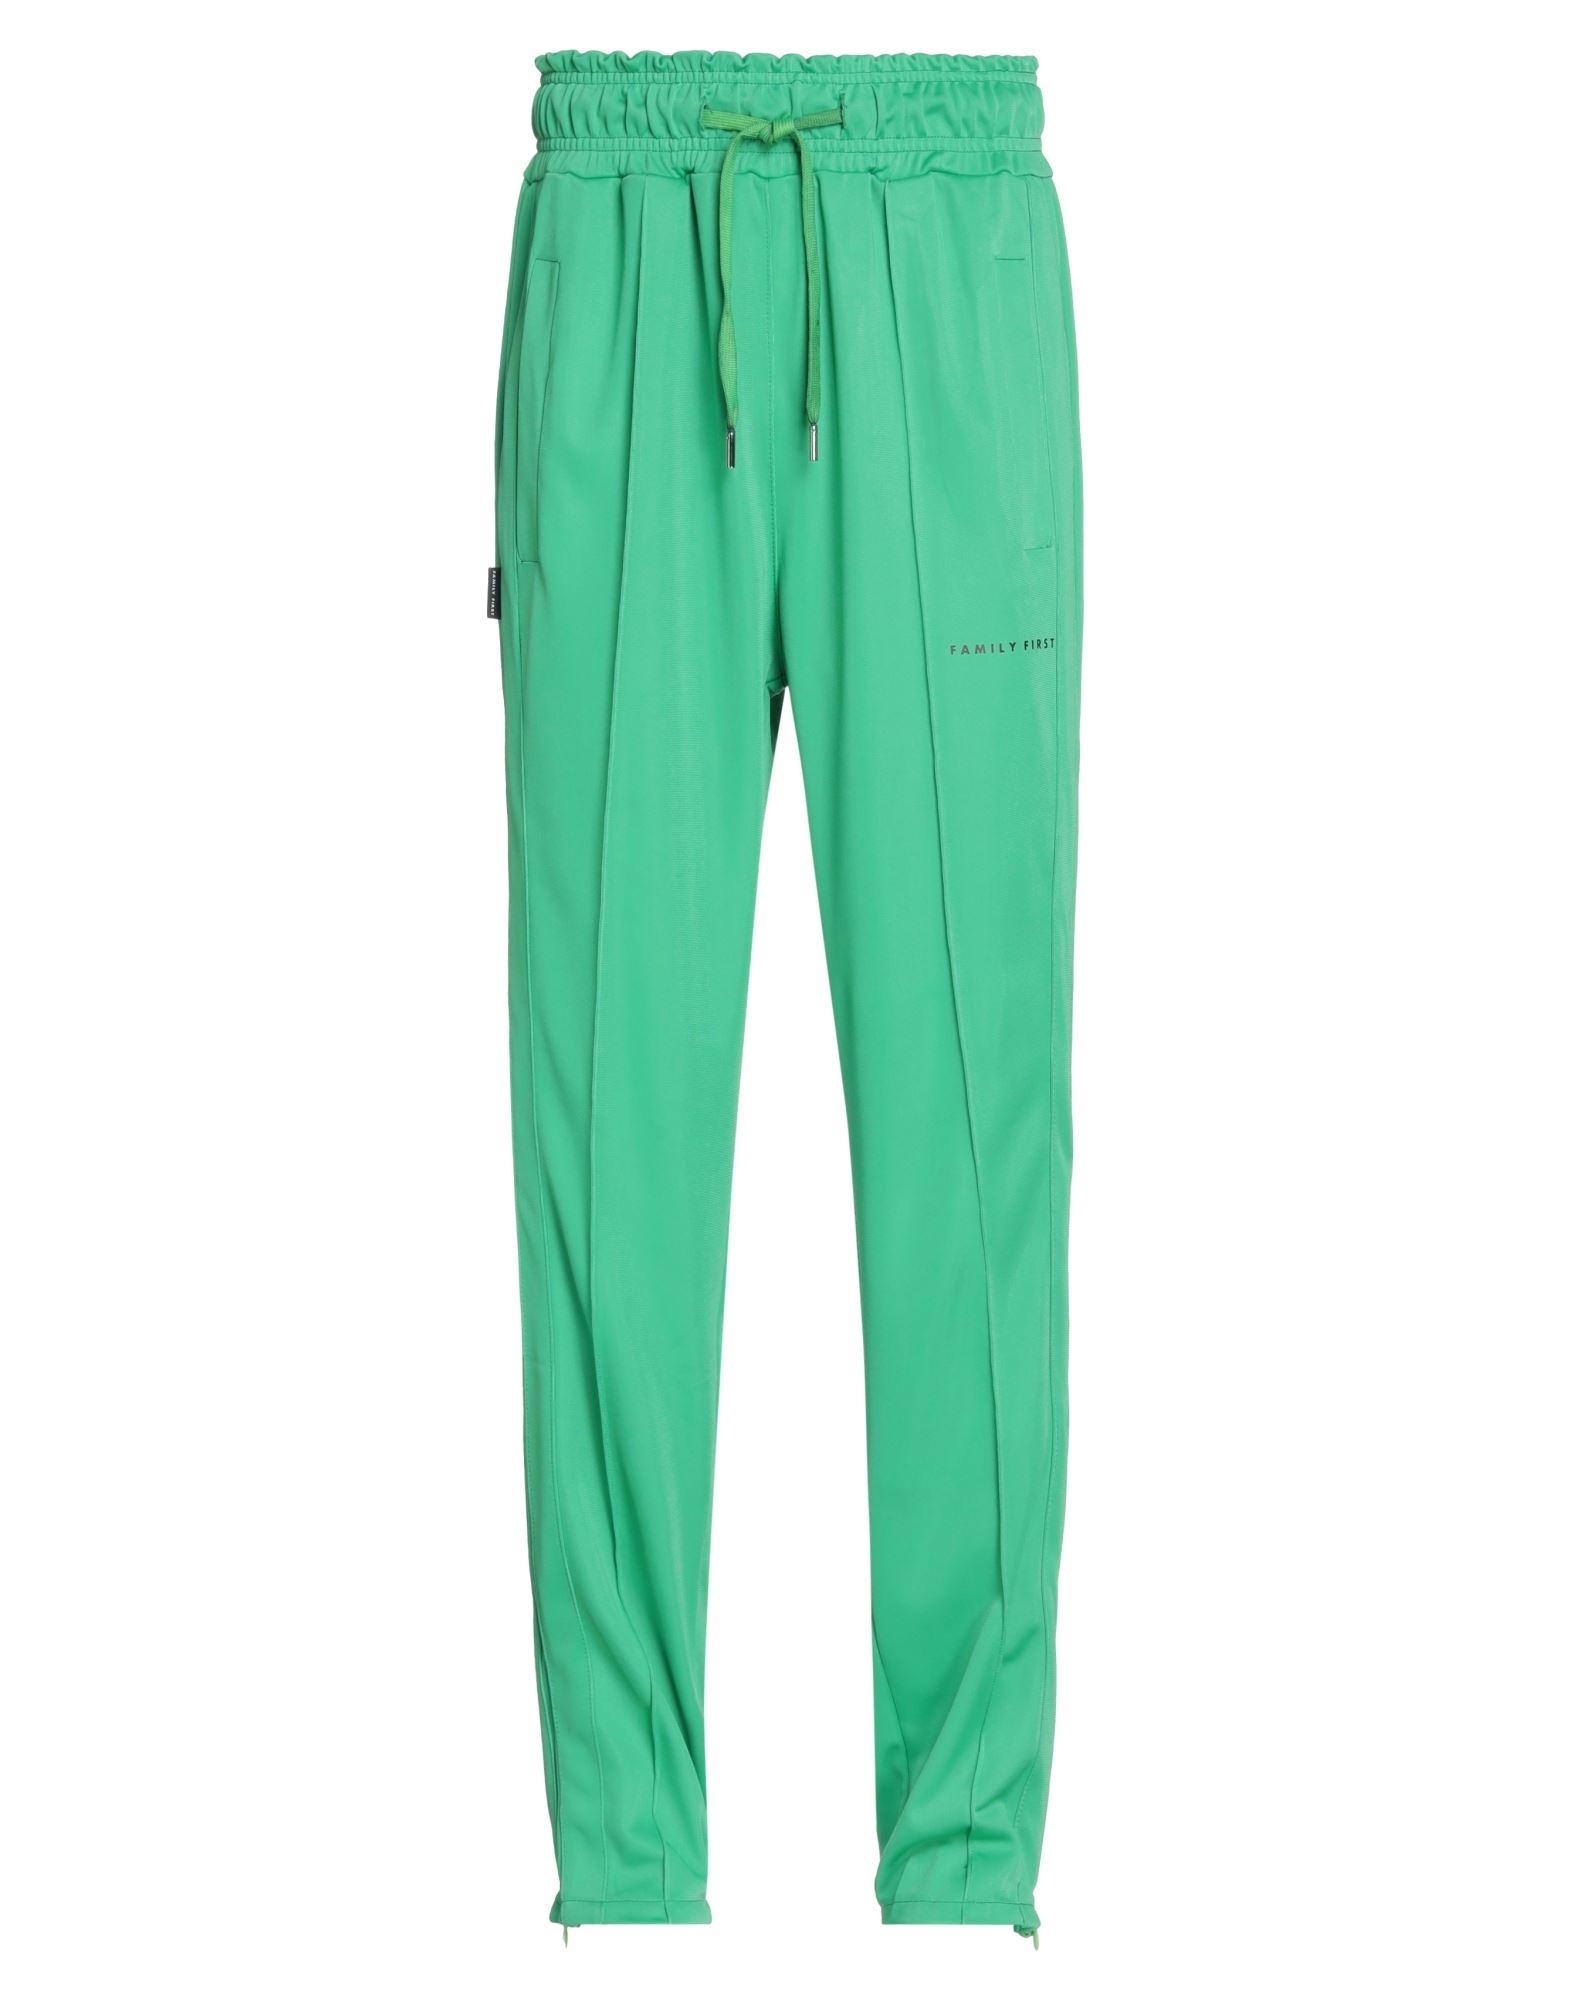 FAMILY FIRST MILANO FAMILY FIRST MILANO MAN PANTS EMERALD GREEN SIZE S POLYESTER